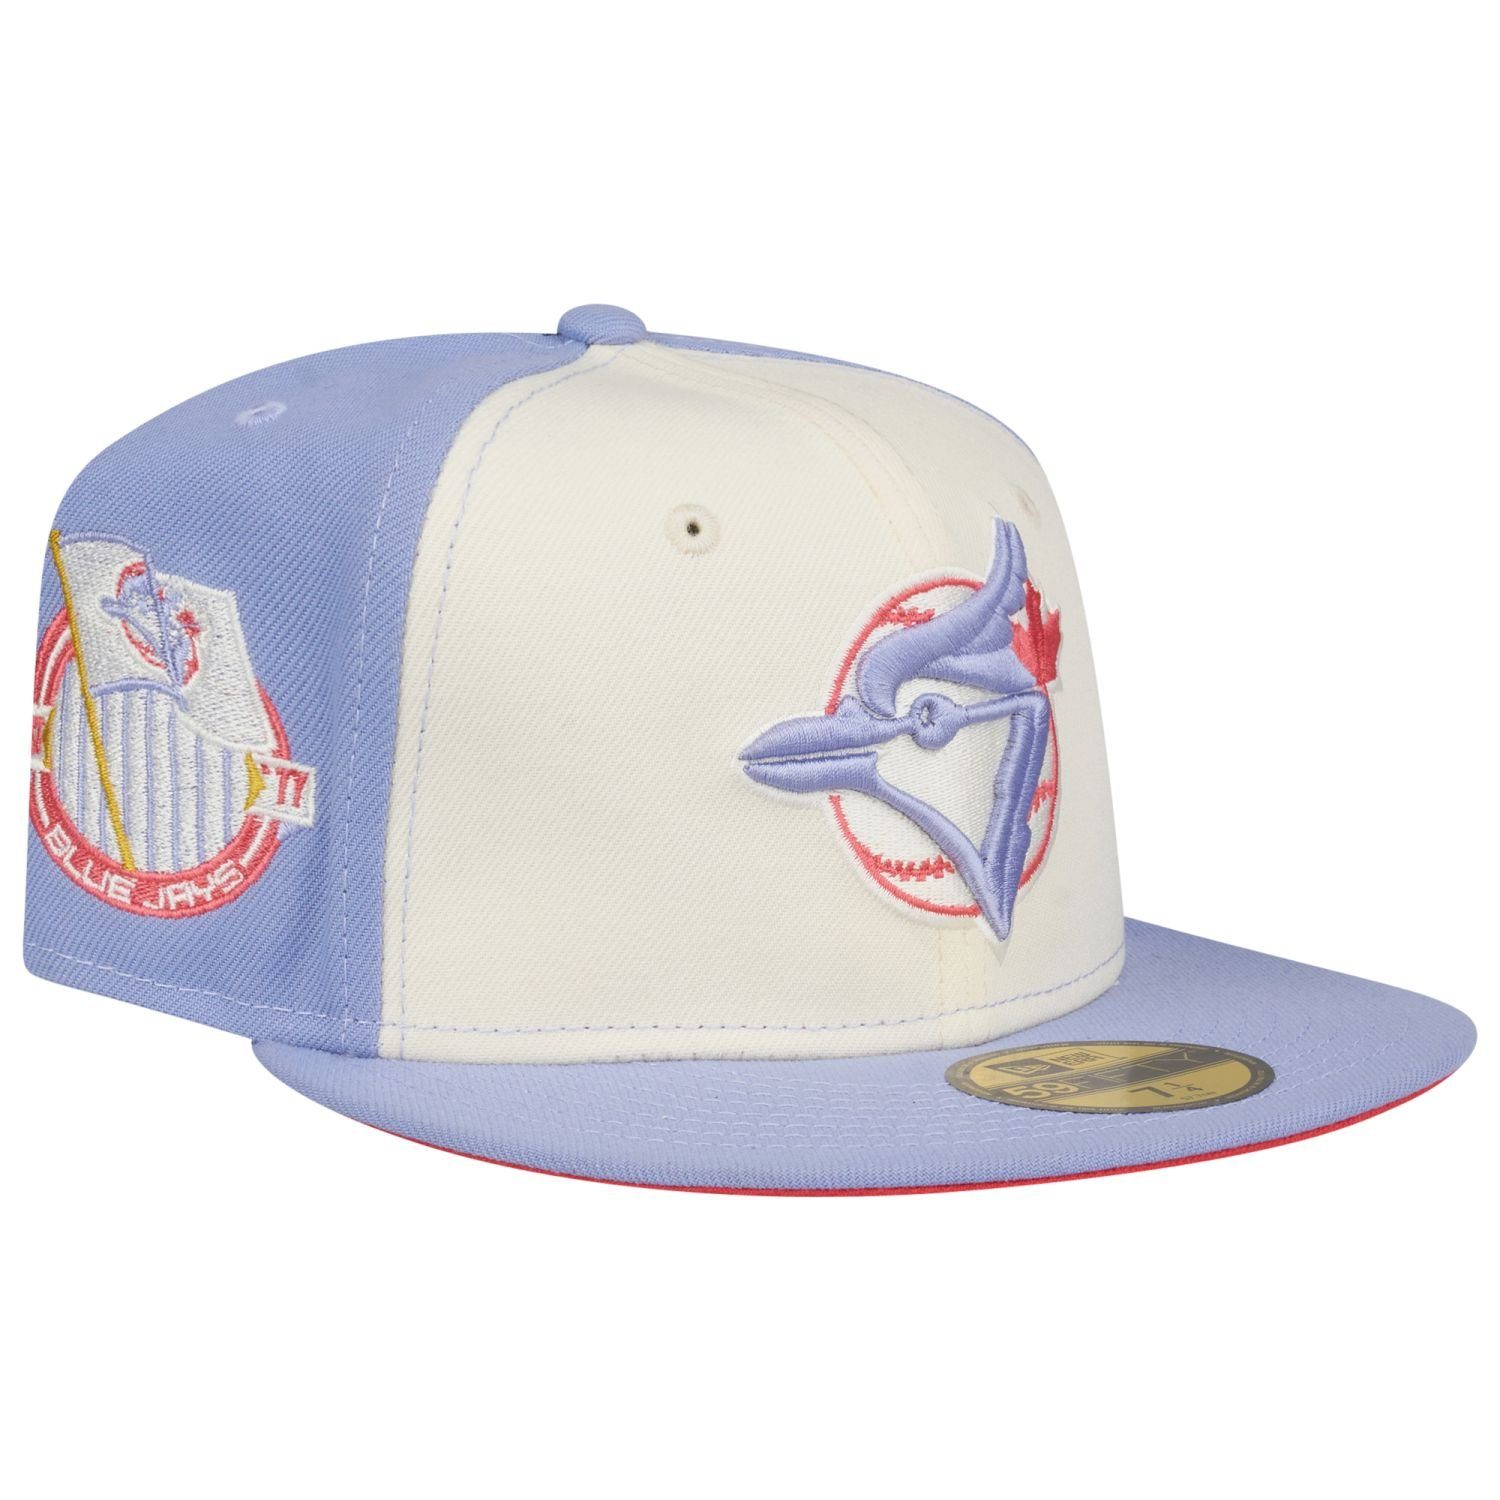 New Era Fitted Cap 59Fifty COOPERSTOWN Toronto Jays